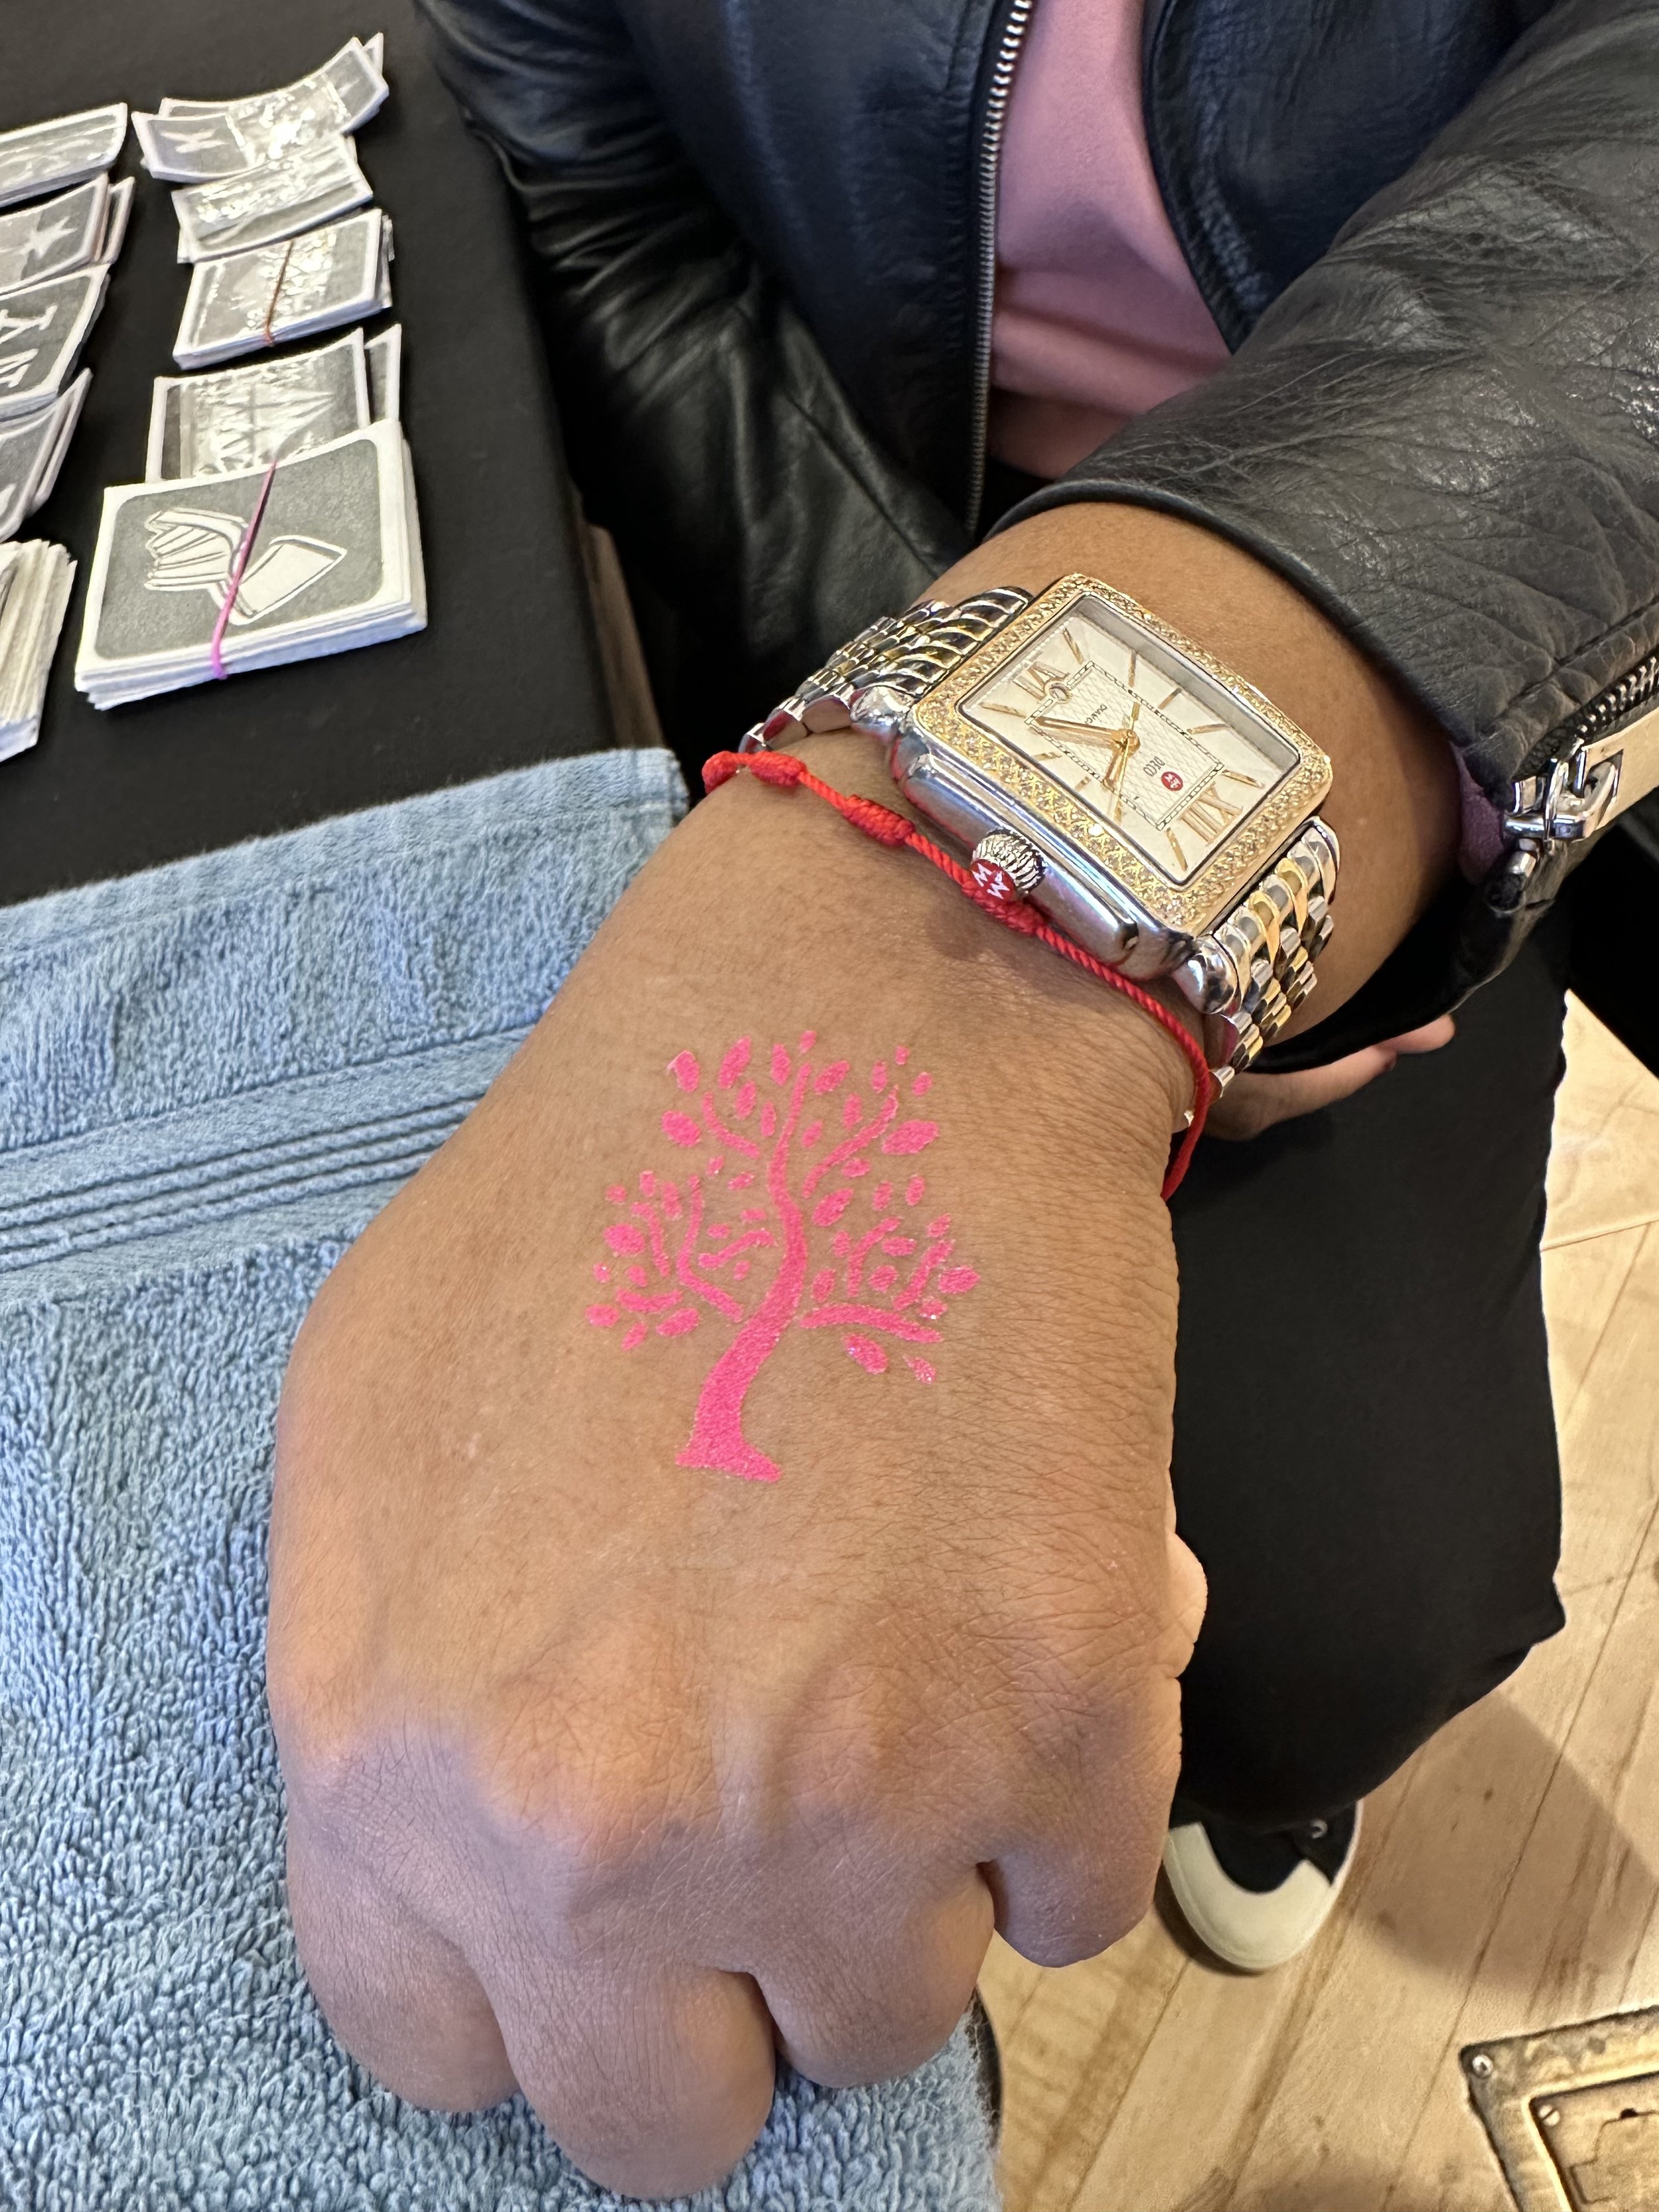 Glitter Tattoos for Breast Cancer Awareness In Store Event New York City.jpg